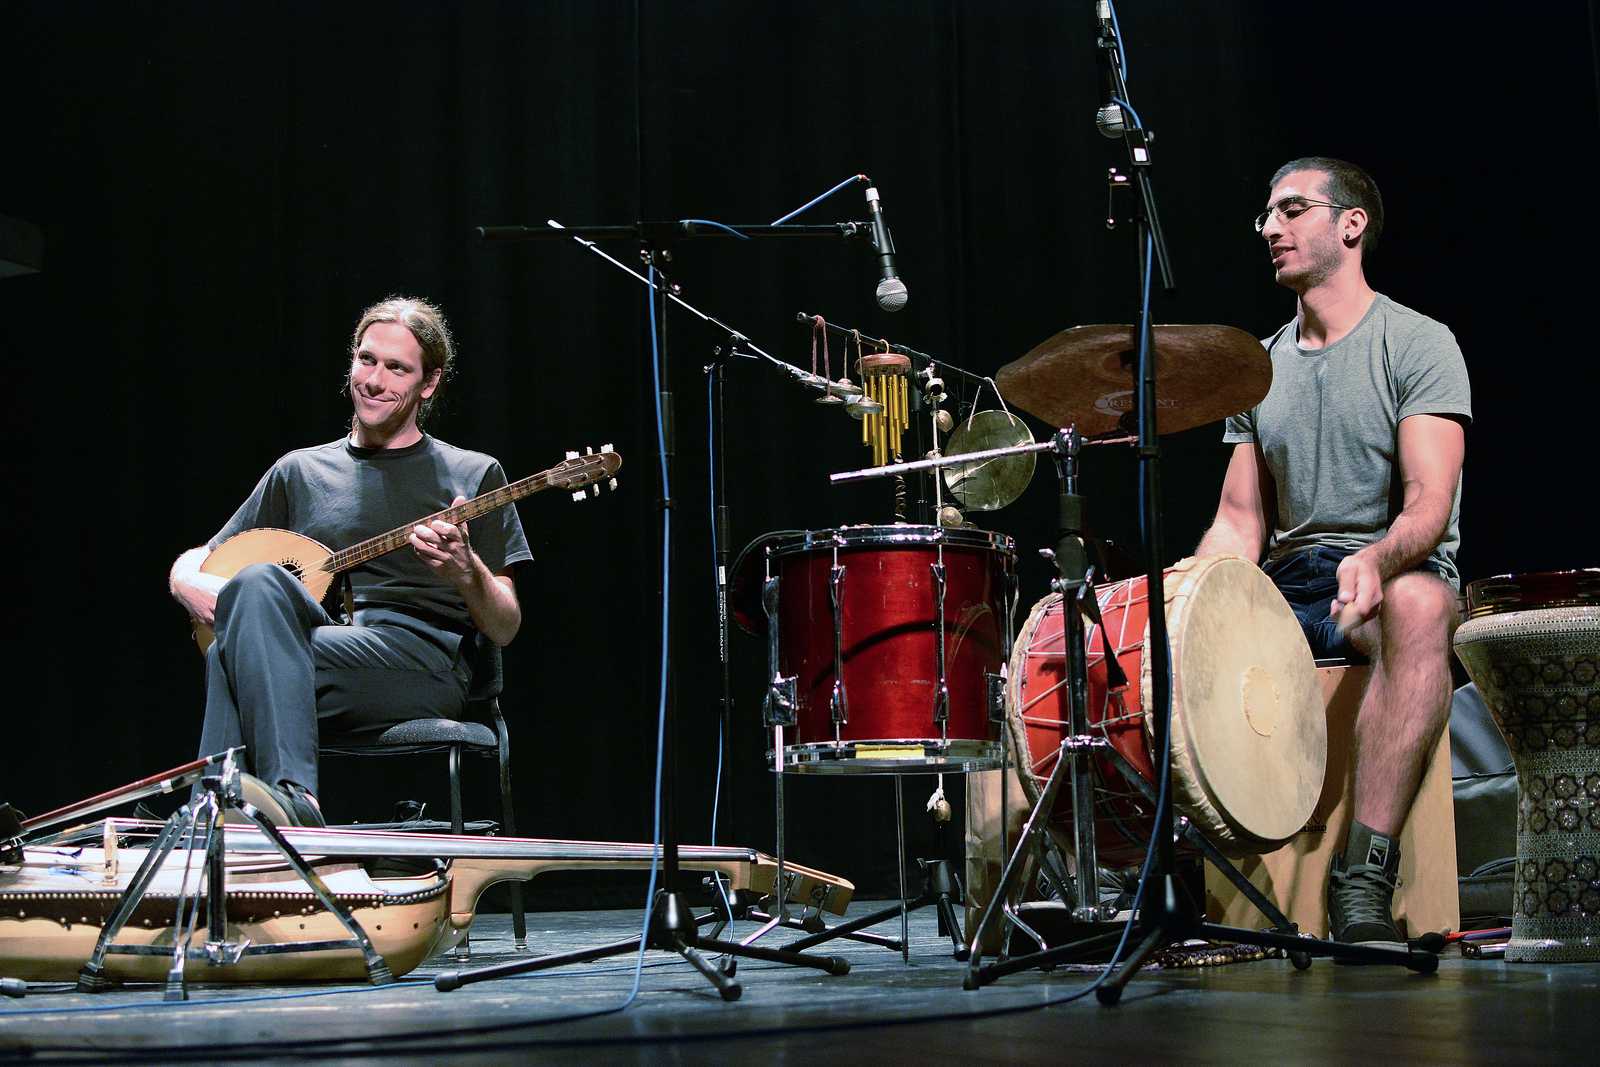 Miles Jay (left) plays the buzuq as Tareq Rantisi (right) beats a drum during an Arabic music seminar in McKenna Theater on Saturday, Sept. 28, 2013. The seminar was part of Room for Hope, a festival celebrating Palestinian culture. Photo by Philip Houston / Xpress